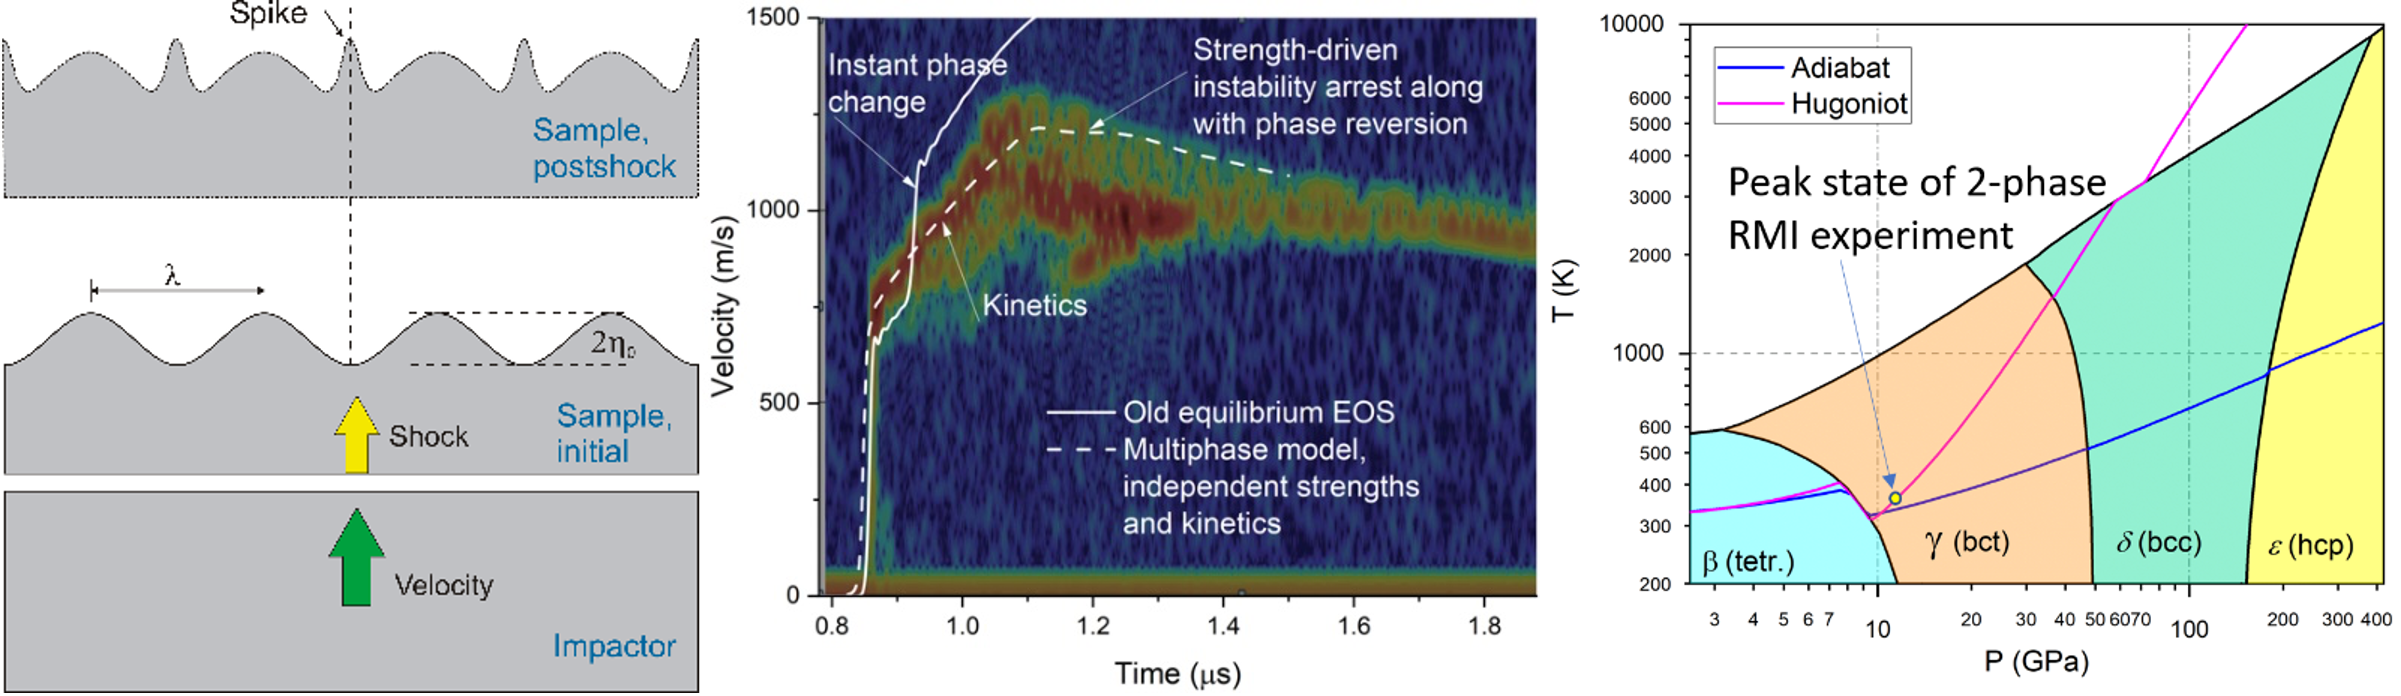 A Richtmyer-Meshkov Instability experiment on tin crossed through a slow transition from the  -phase to the  -phase and then back again.   The new multiphase modeling capability in FLAG was able to capture the phase change kinetics and the effects of different strength in each phase, at strain rates of about 107/sec.  (The maximum velocity in the experimental spectrogram corresponds to the “spike” velocity, and that is what was taken from the simulation for comparison)